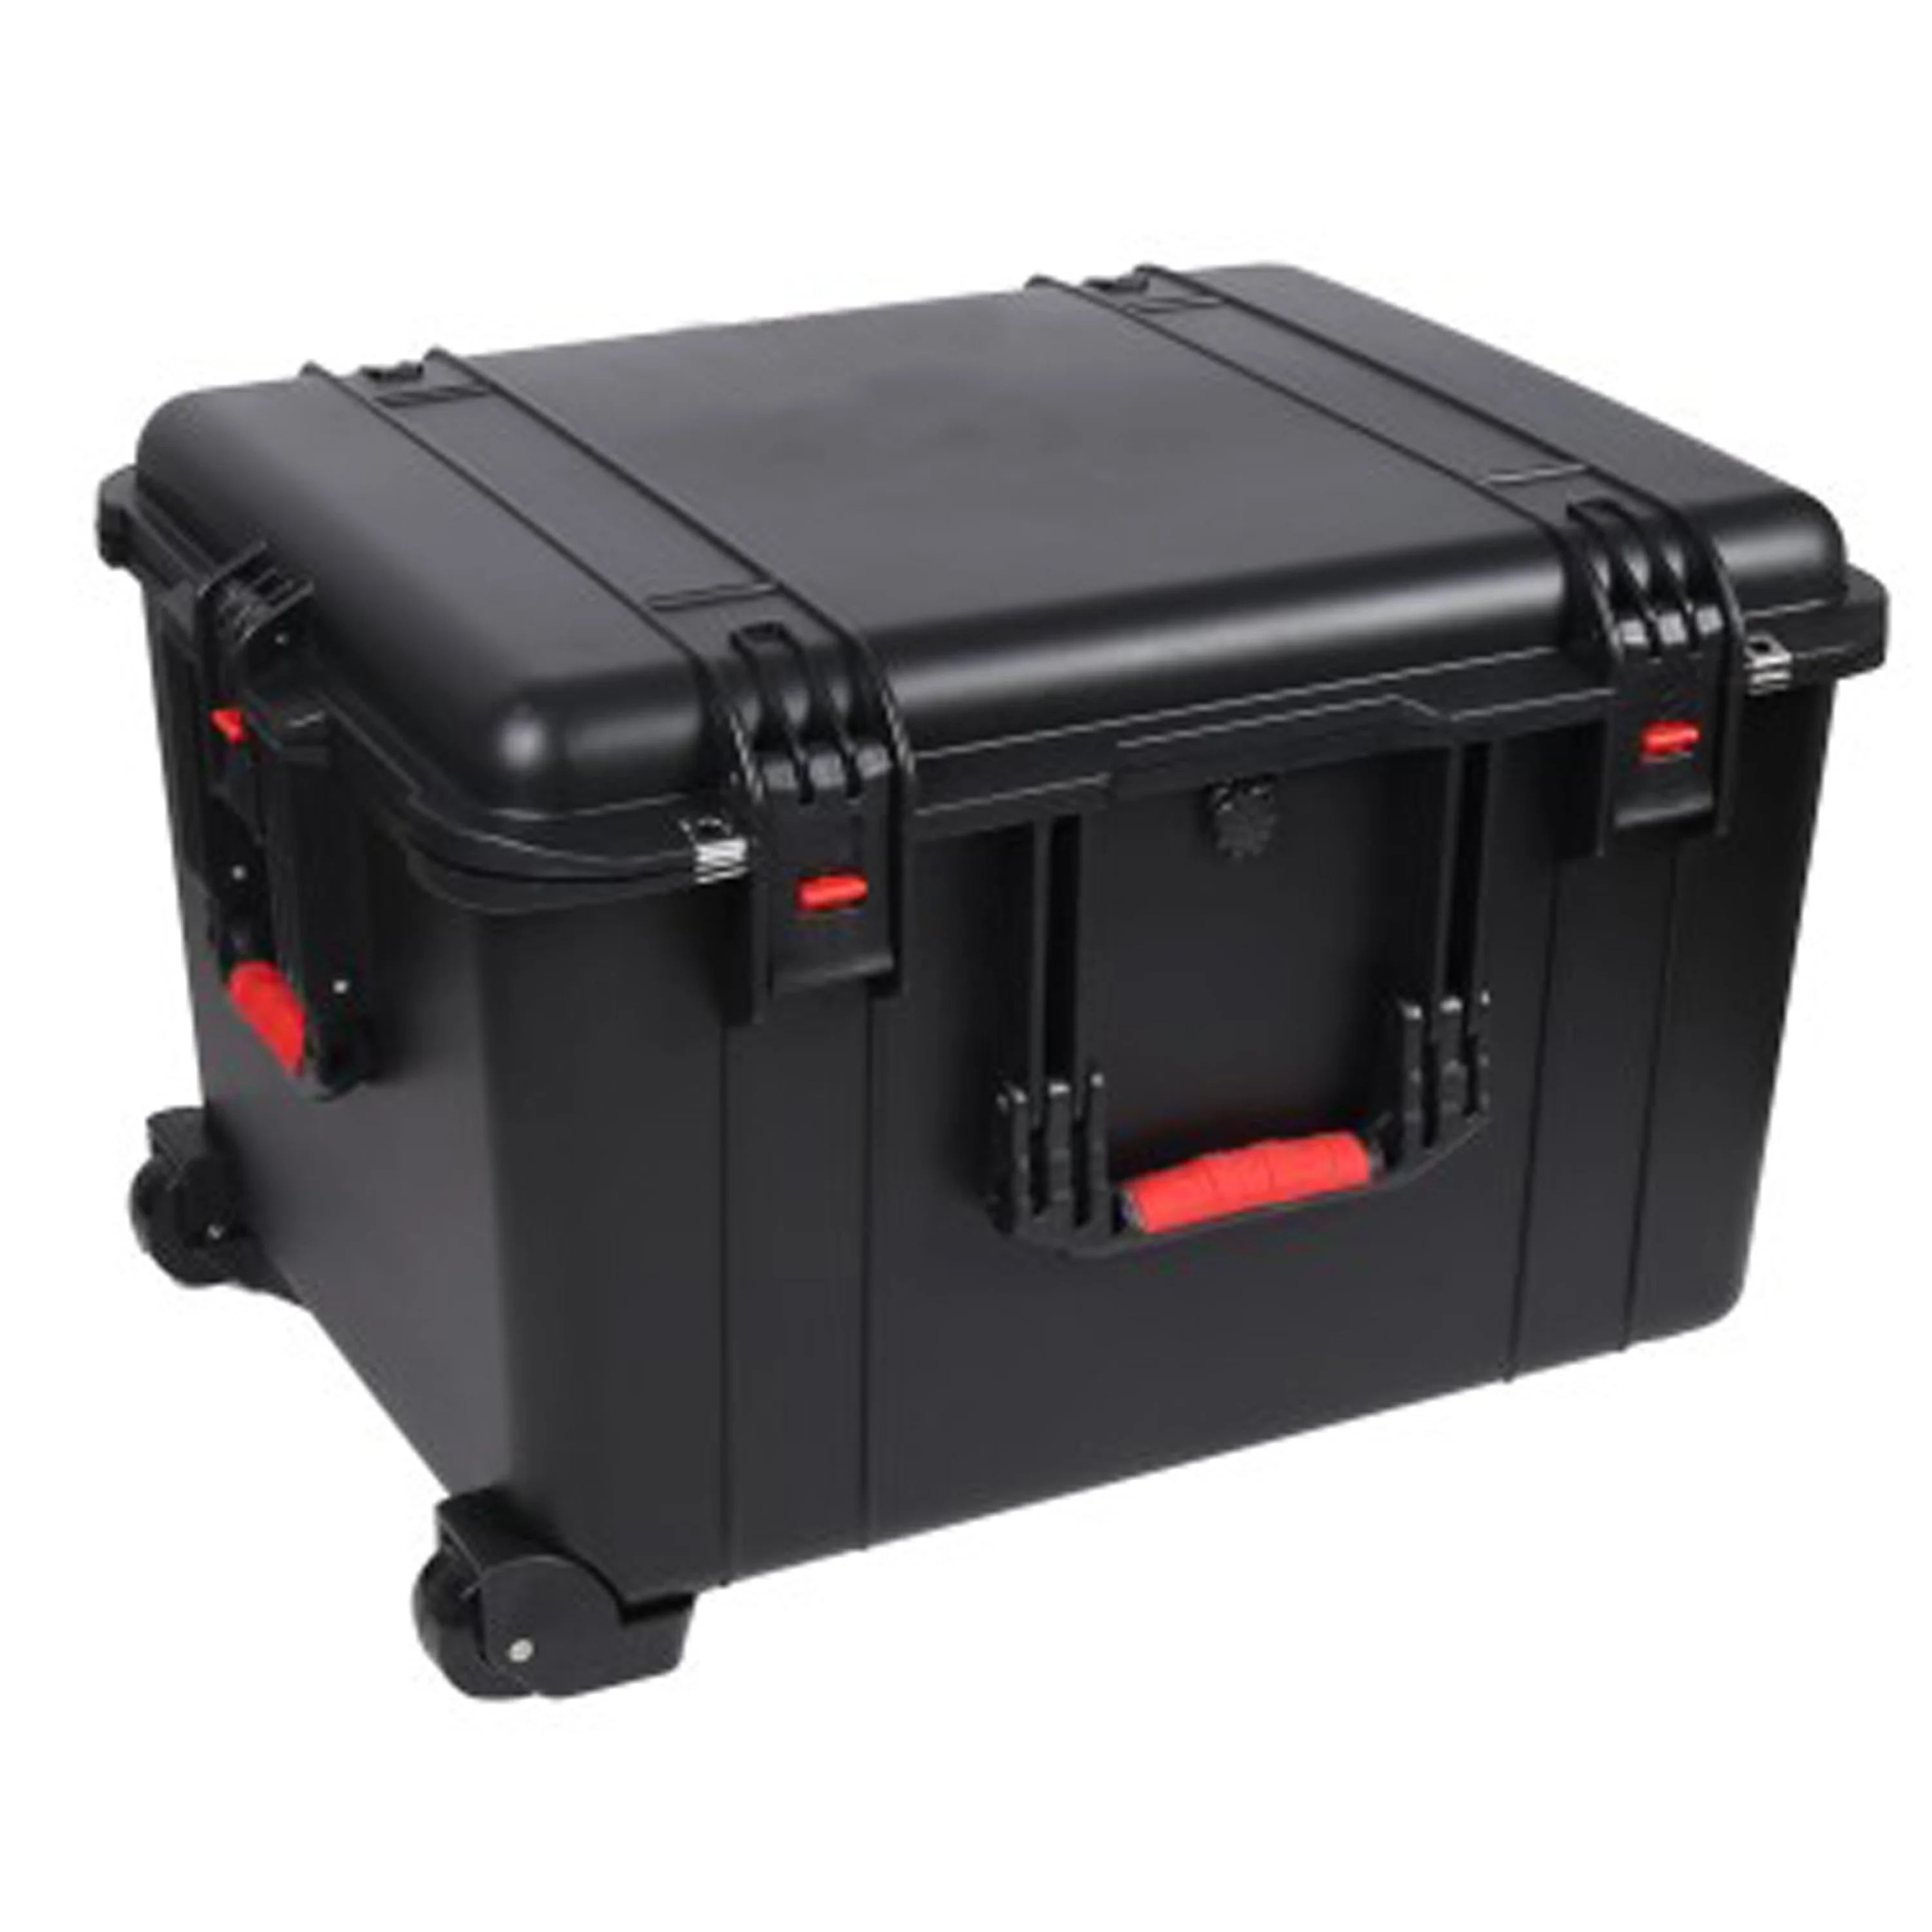 634x503x400mm Large Size PP Material Hard Plastic Case Instrument Carrying Protective Tool Case with Handle and Wheel